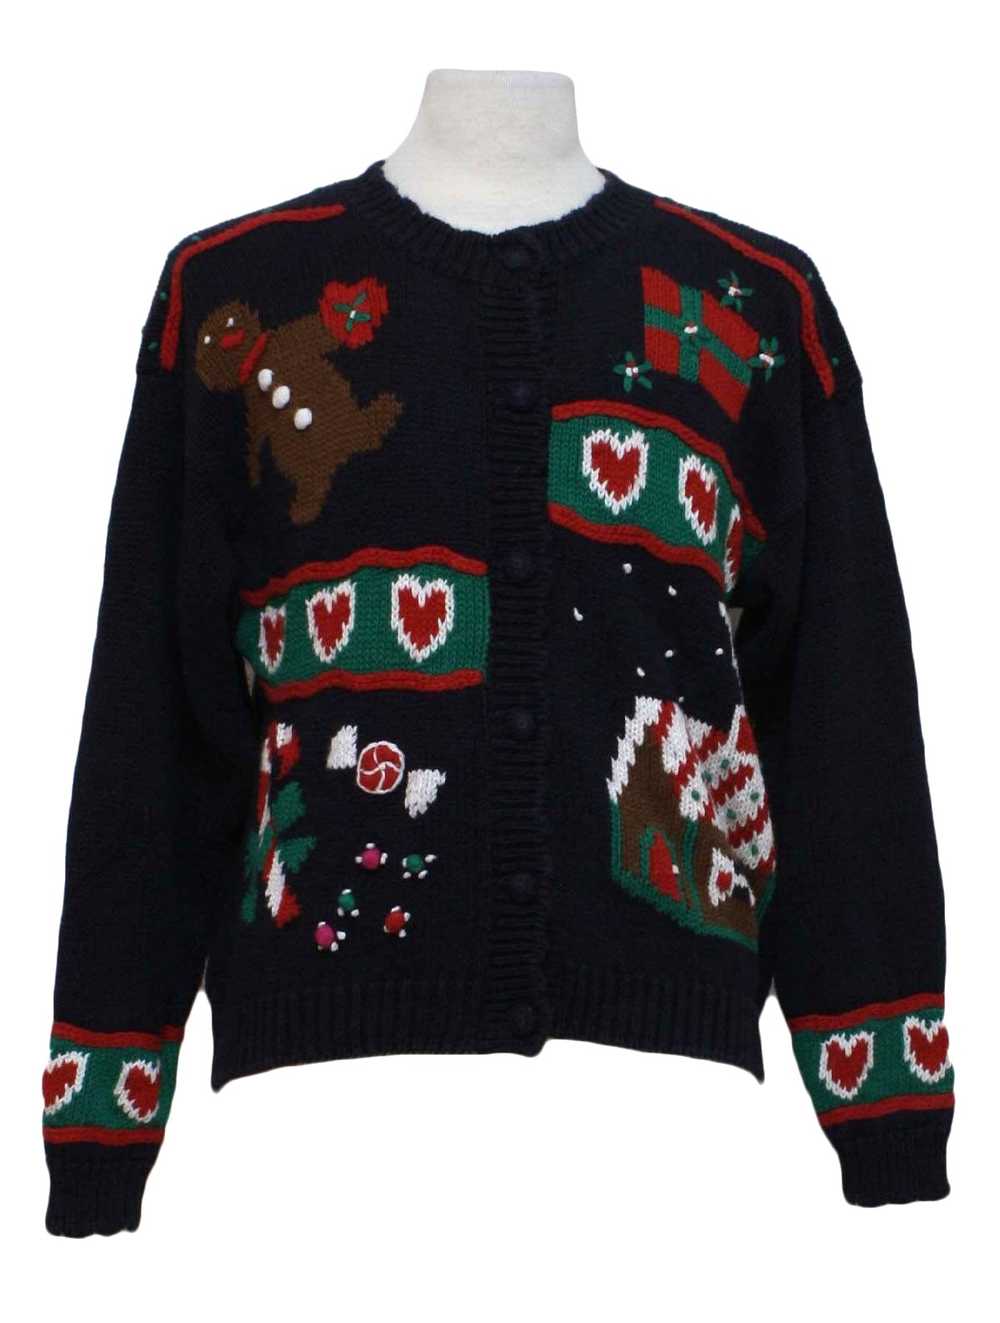 Style Womens Ugly Christmas Sweater - image 1